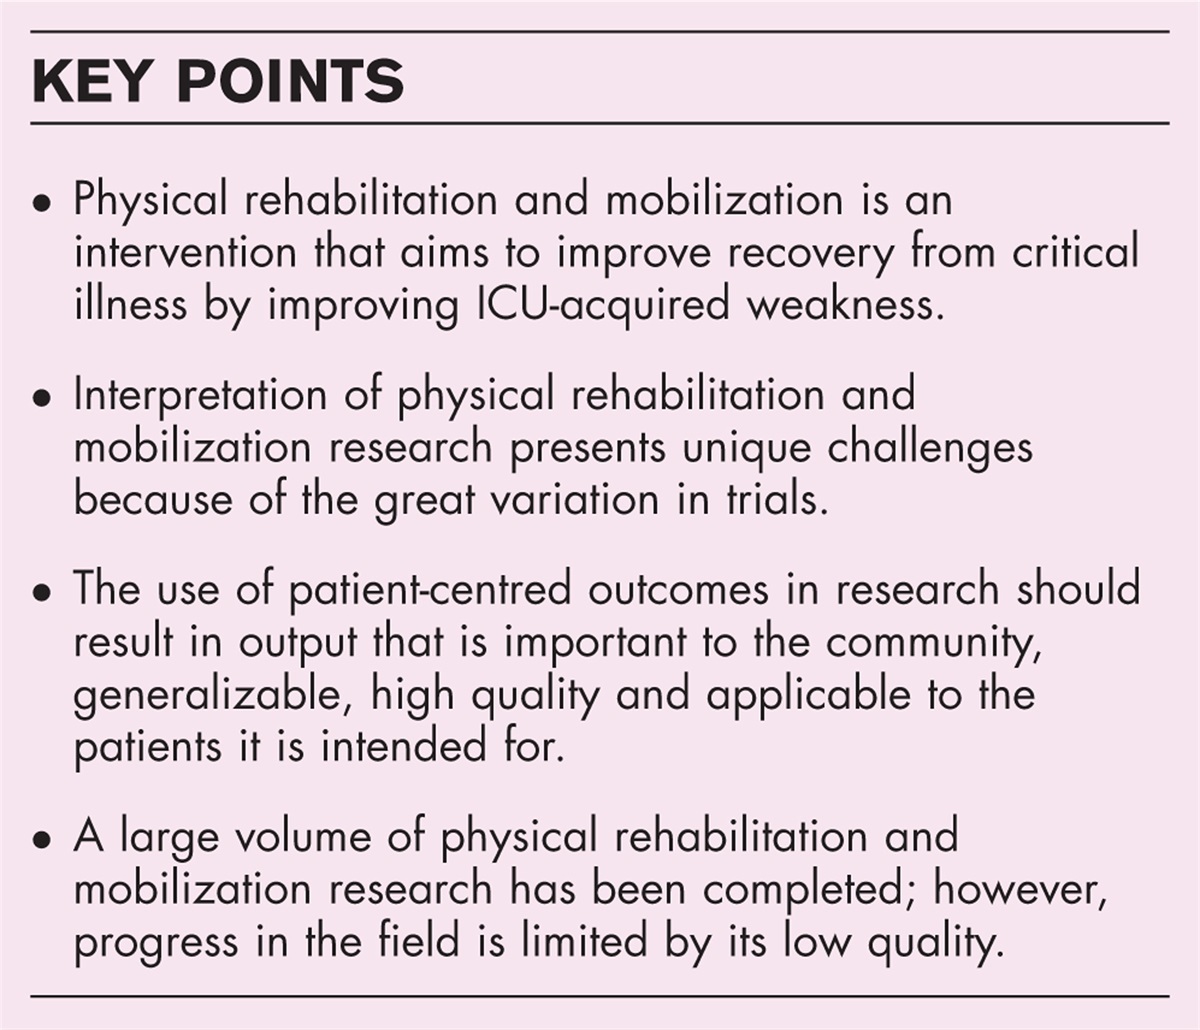 Physical rehabilitation, mobilization and patient-centred outcomes: what is new?